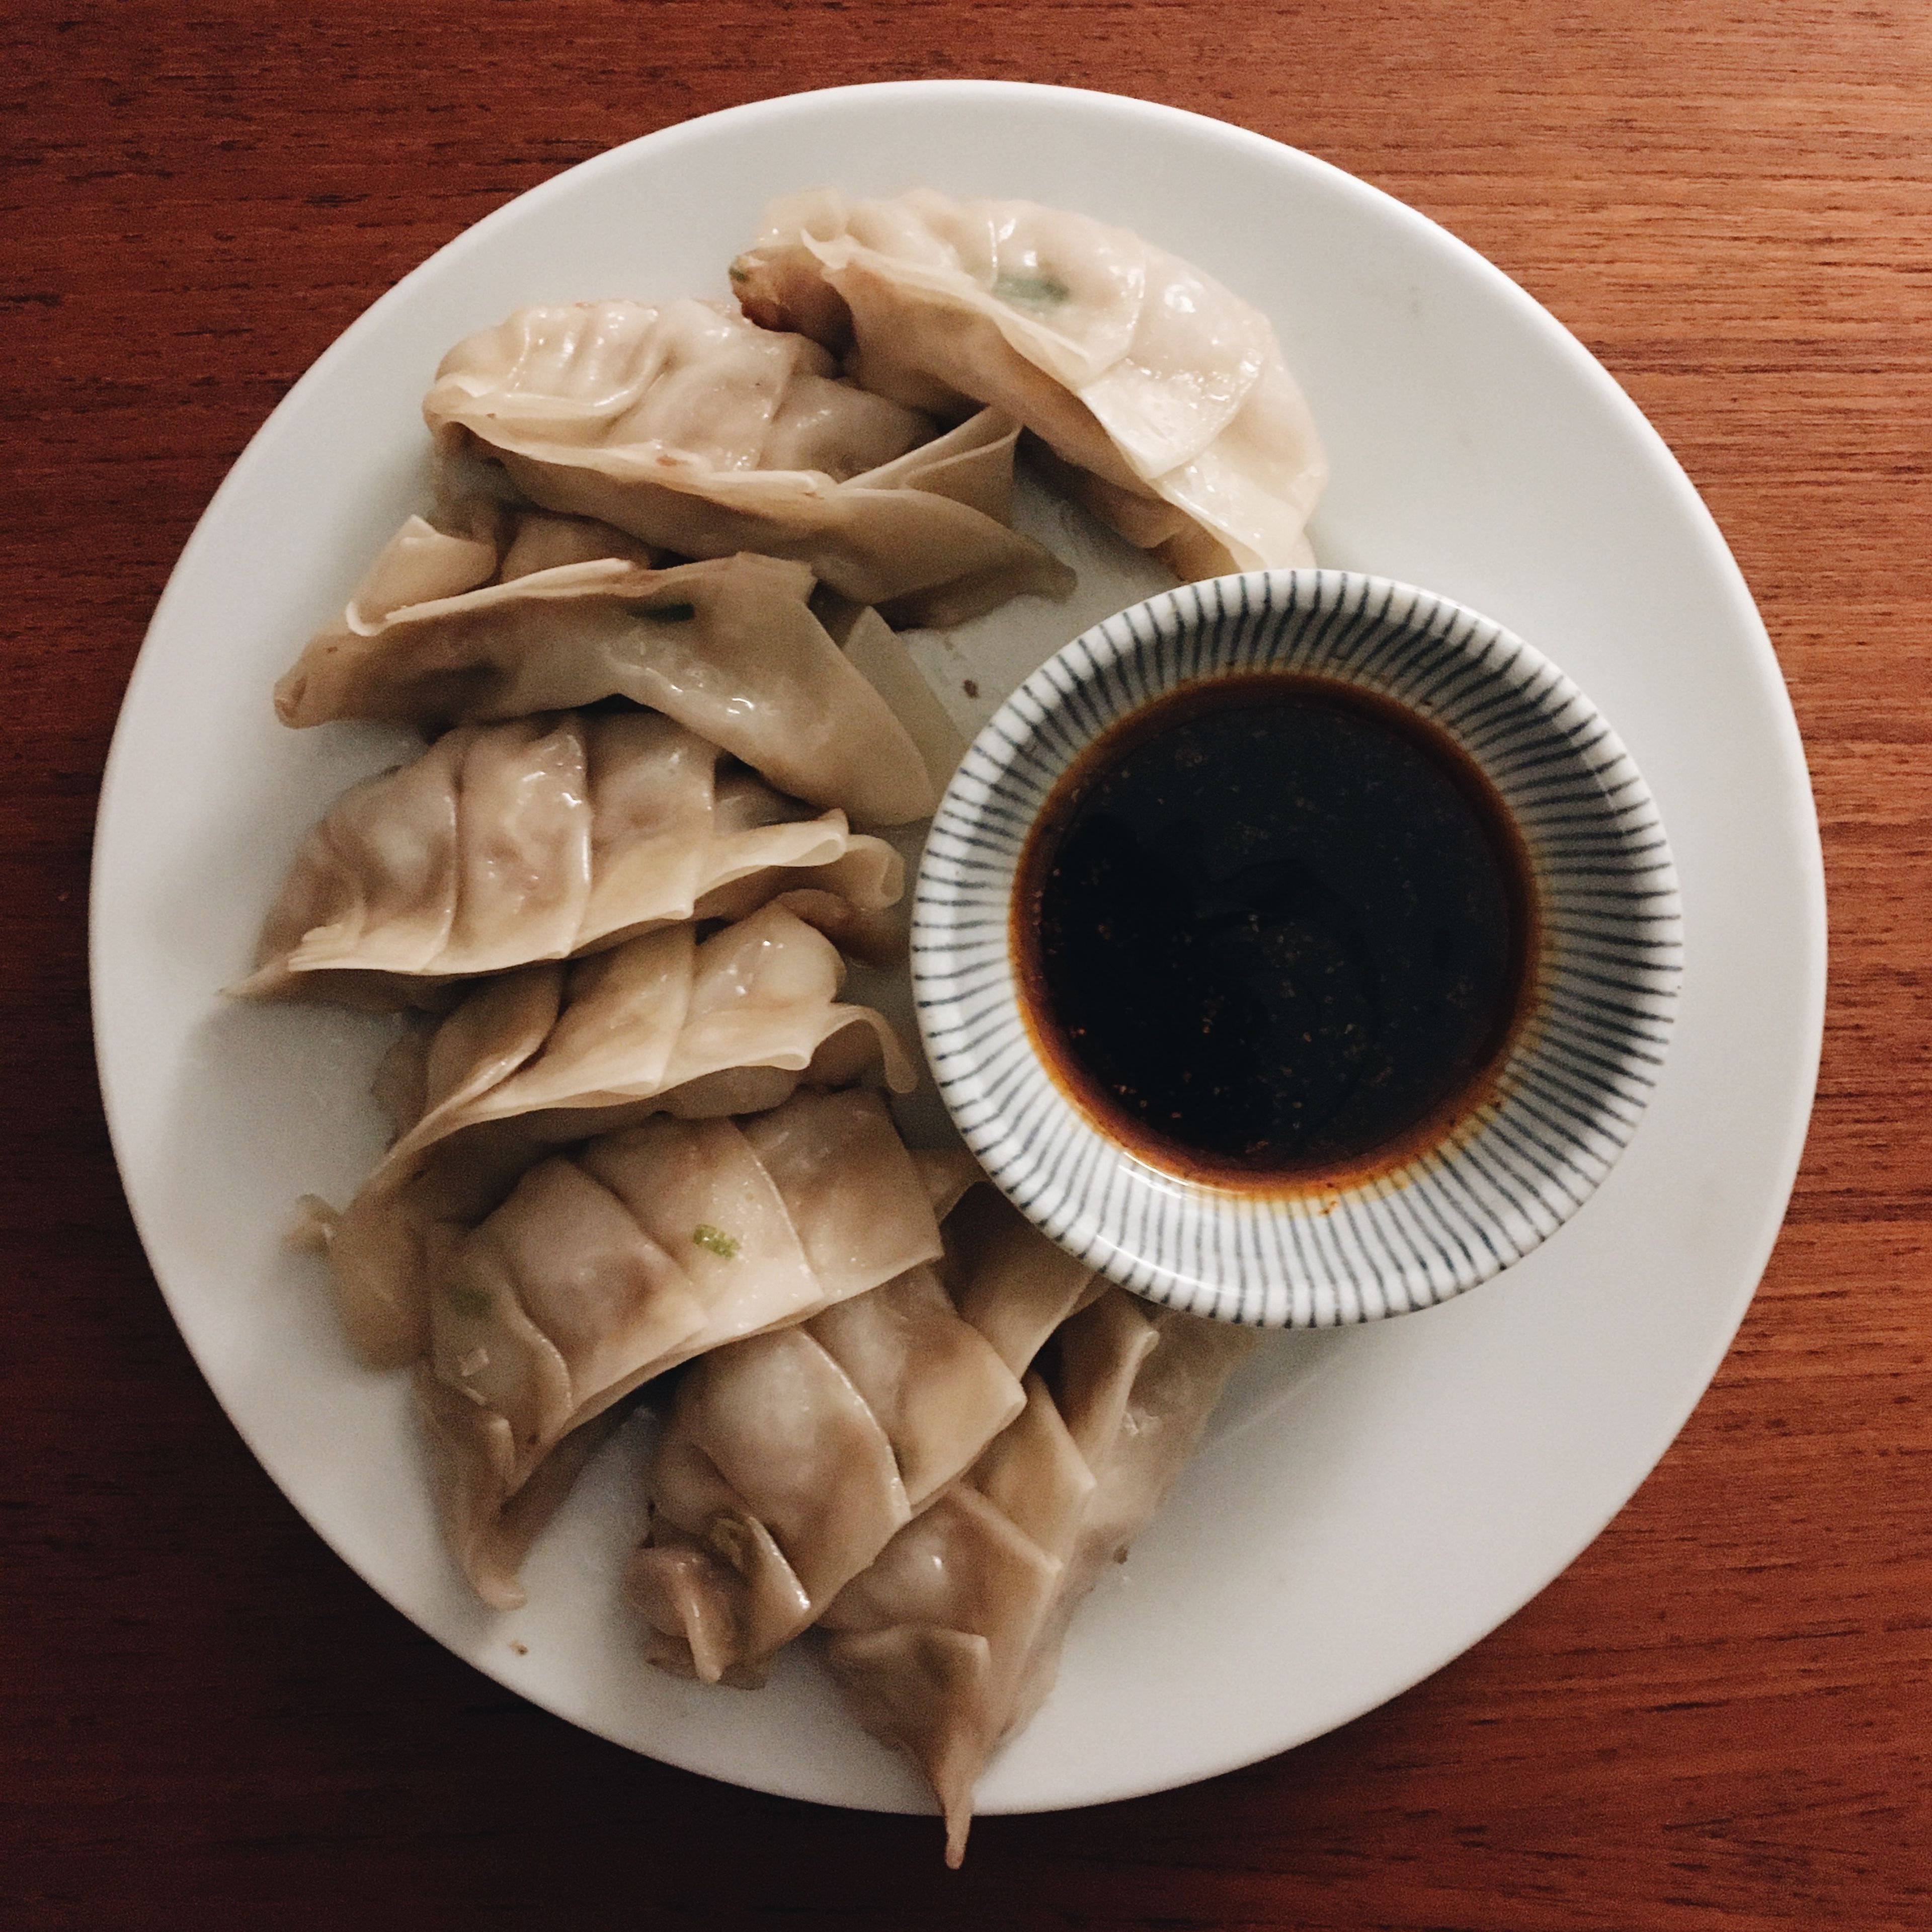 Transfer to a plate and serve with a mixture of soy sauce, vinegar and chili oil (optional) as dipping sauce. Enjoy!